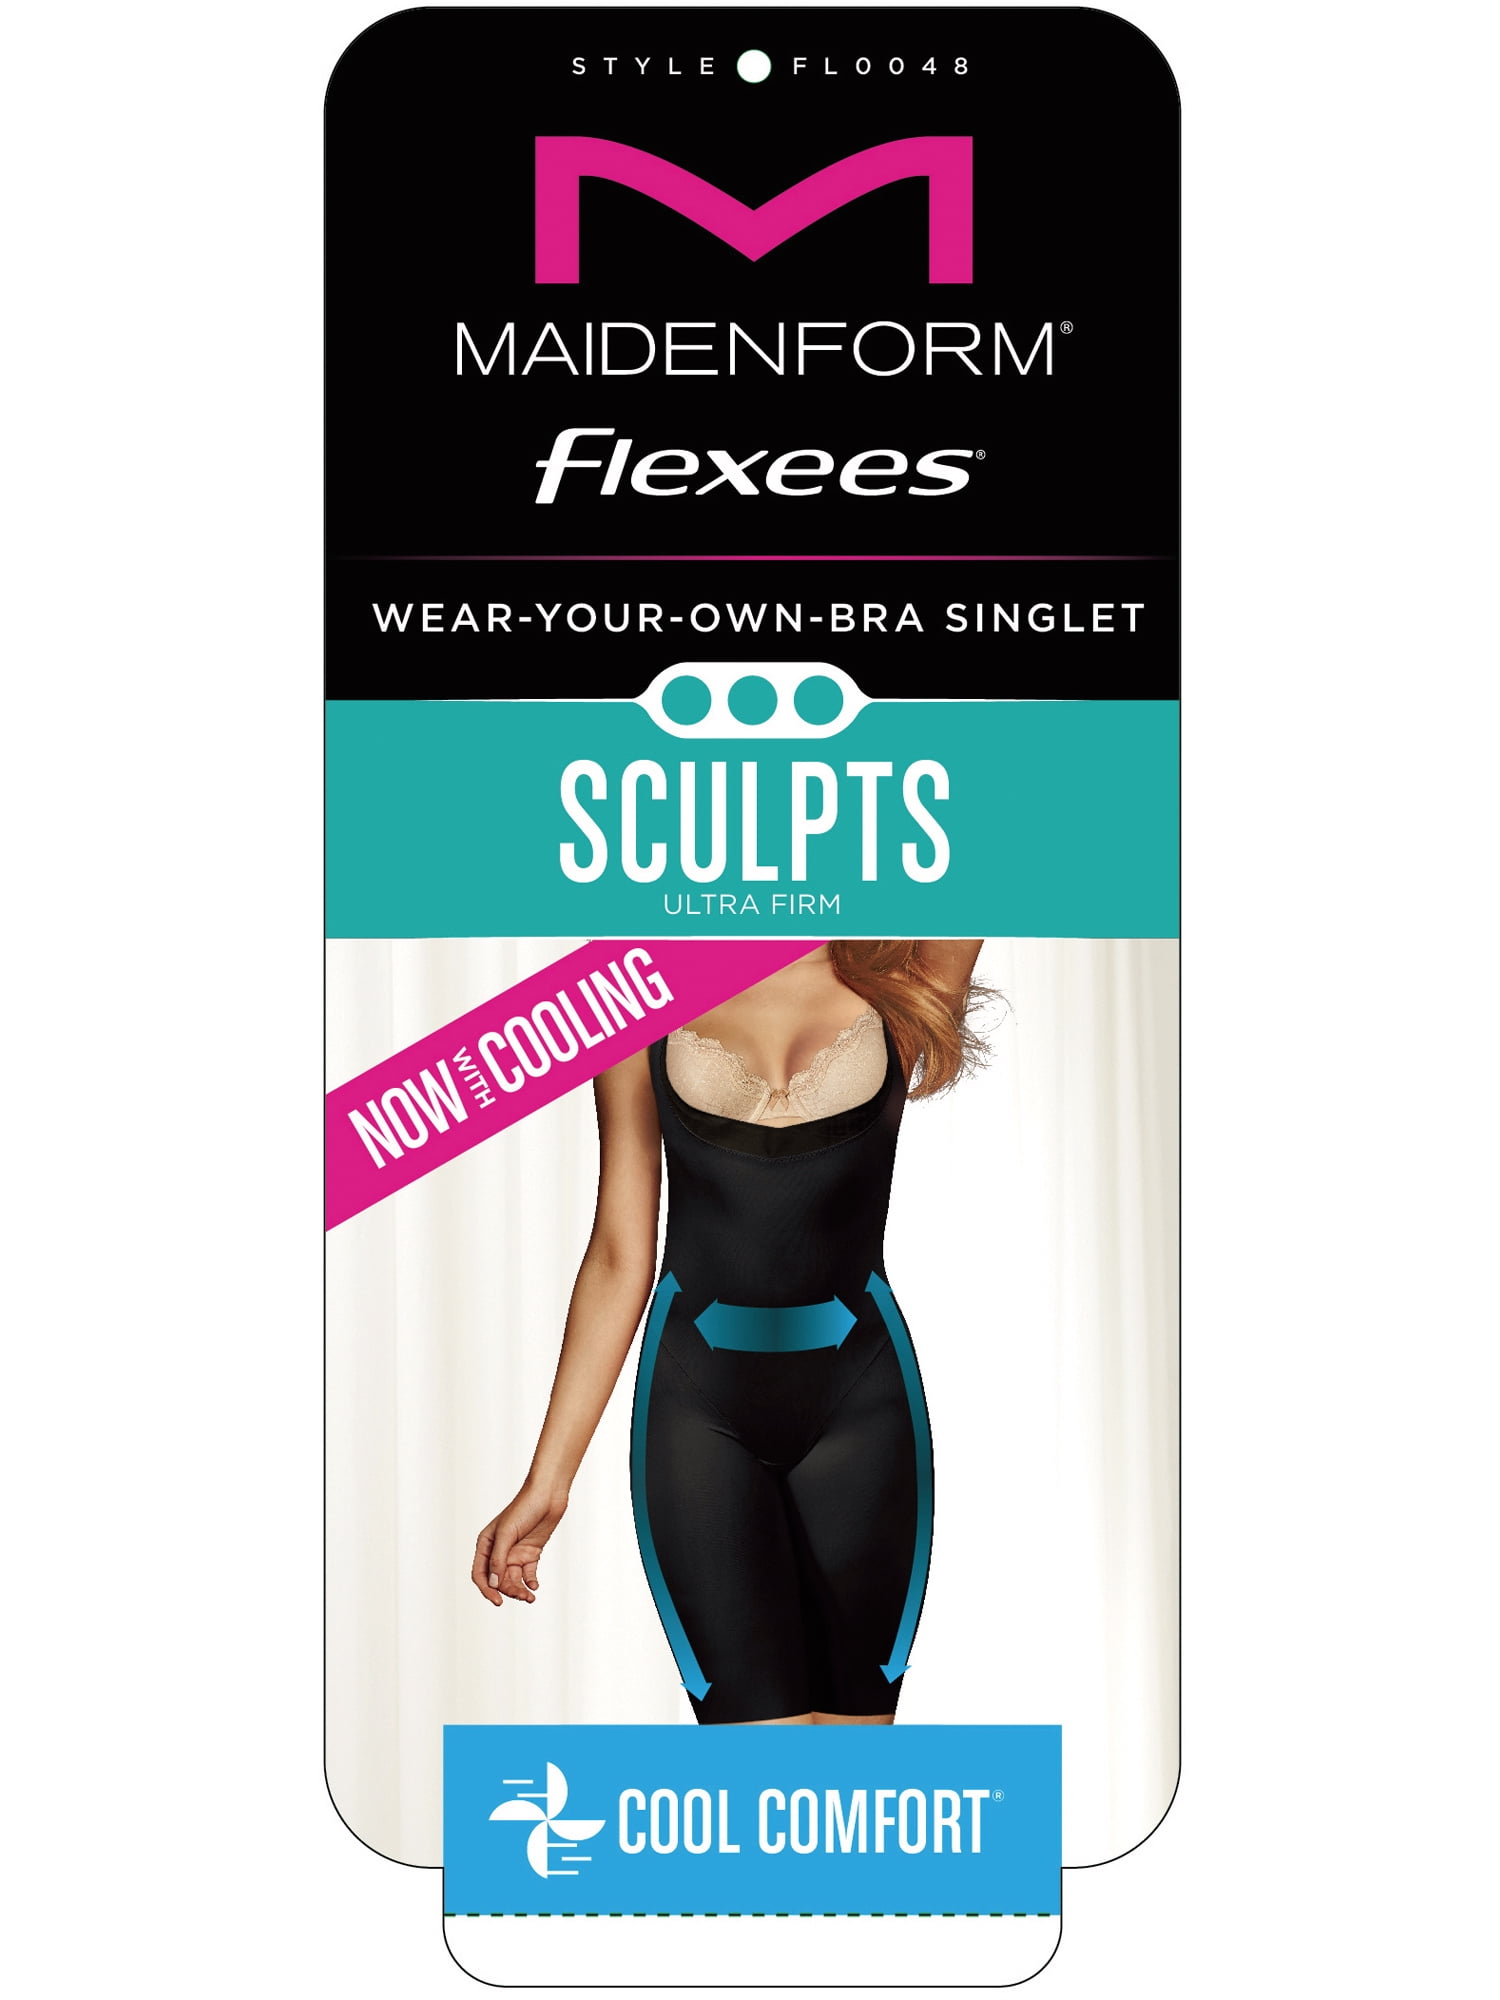 Maidenform Flexees Womens Shapewear Comfort Devotion Wear Your Own Bra  Romper Black Small >>> Click image to review more…